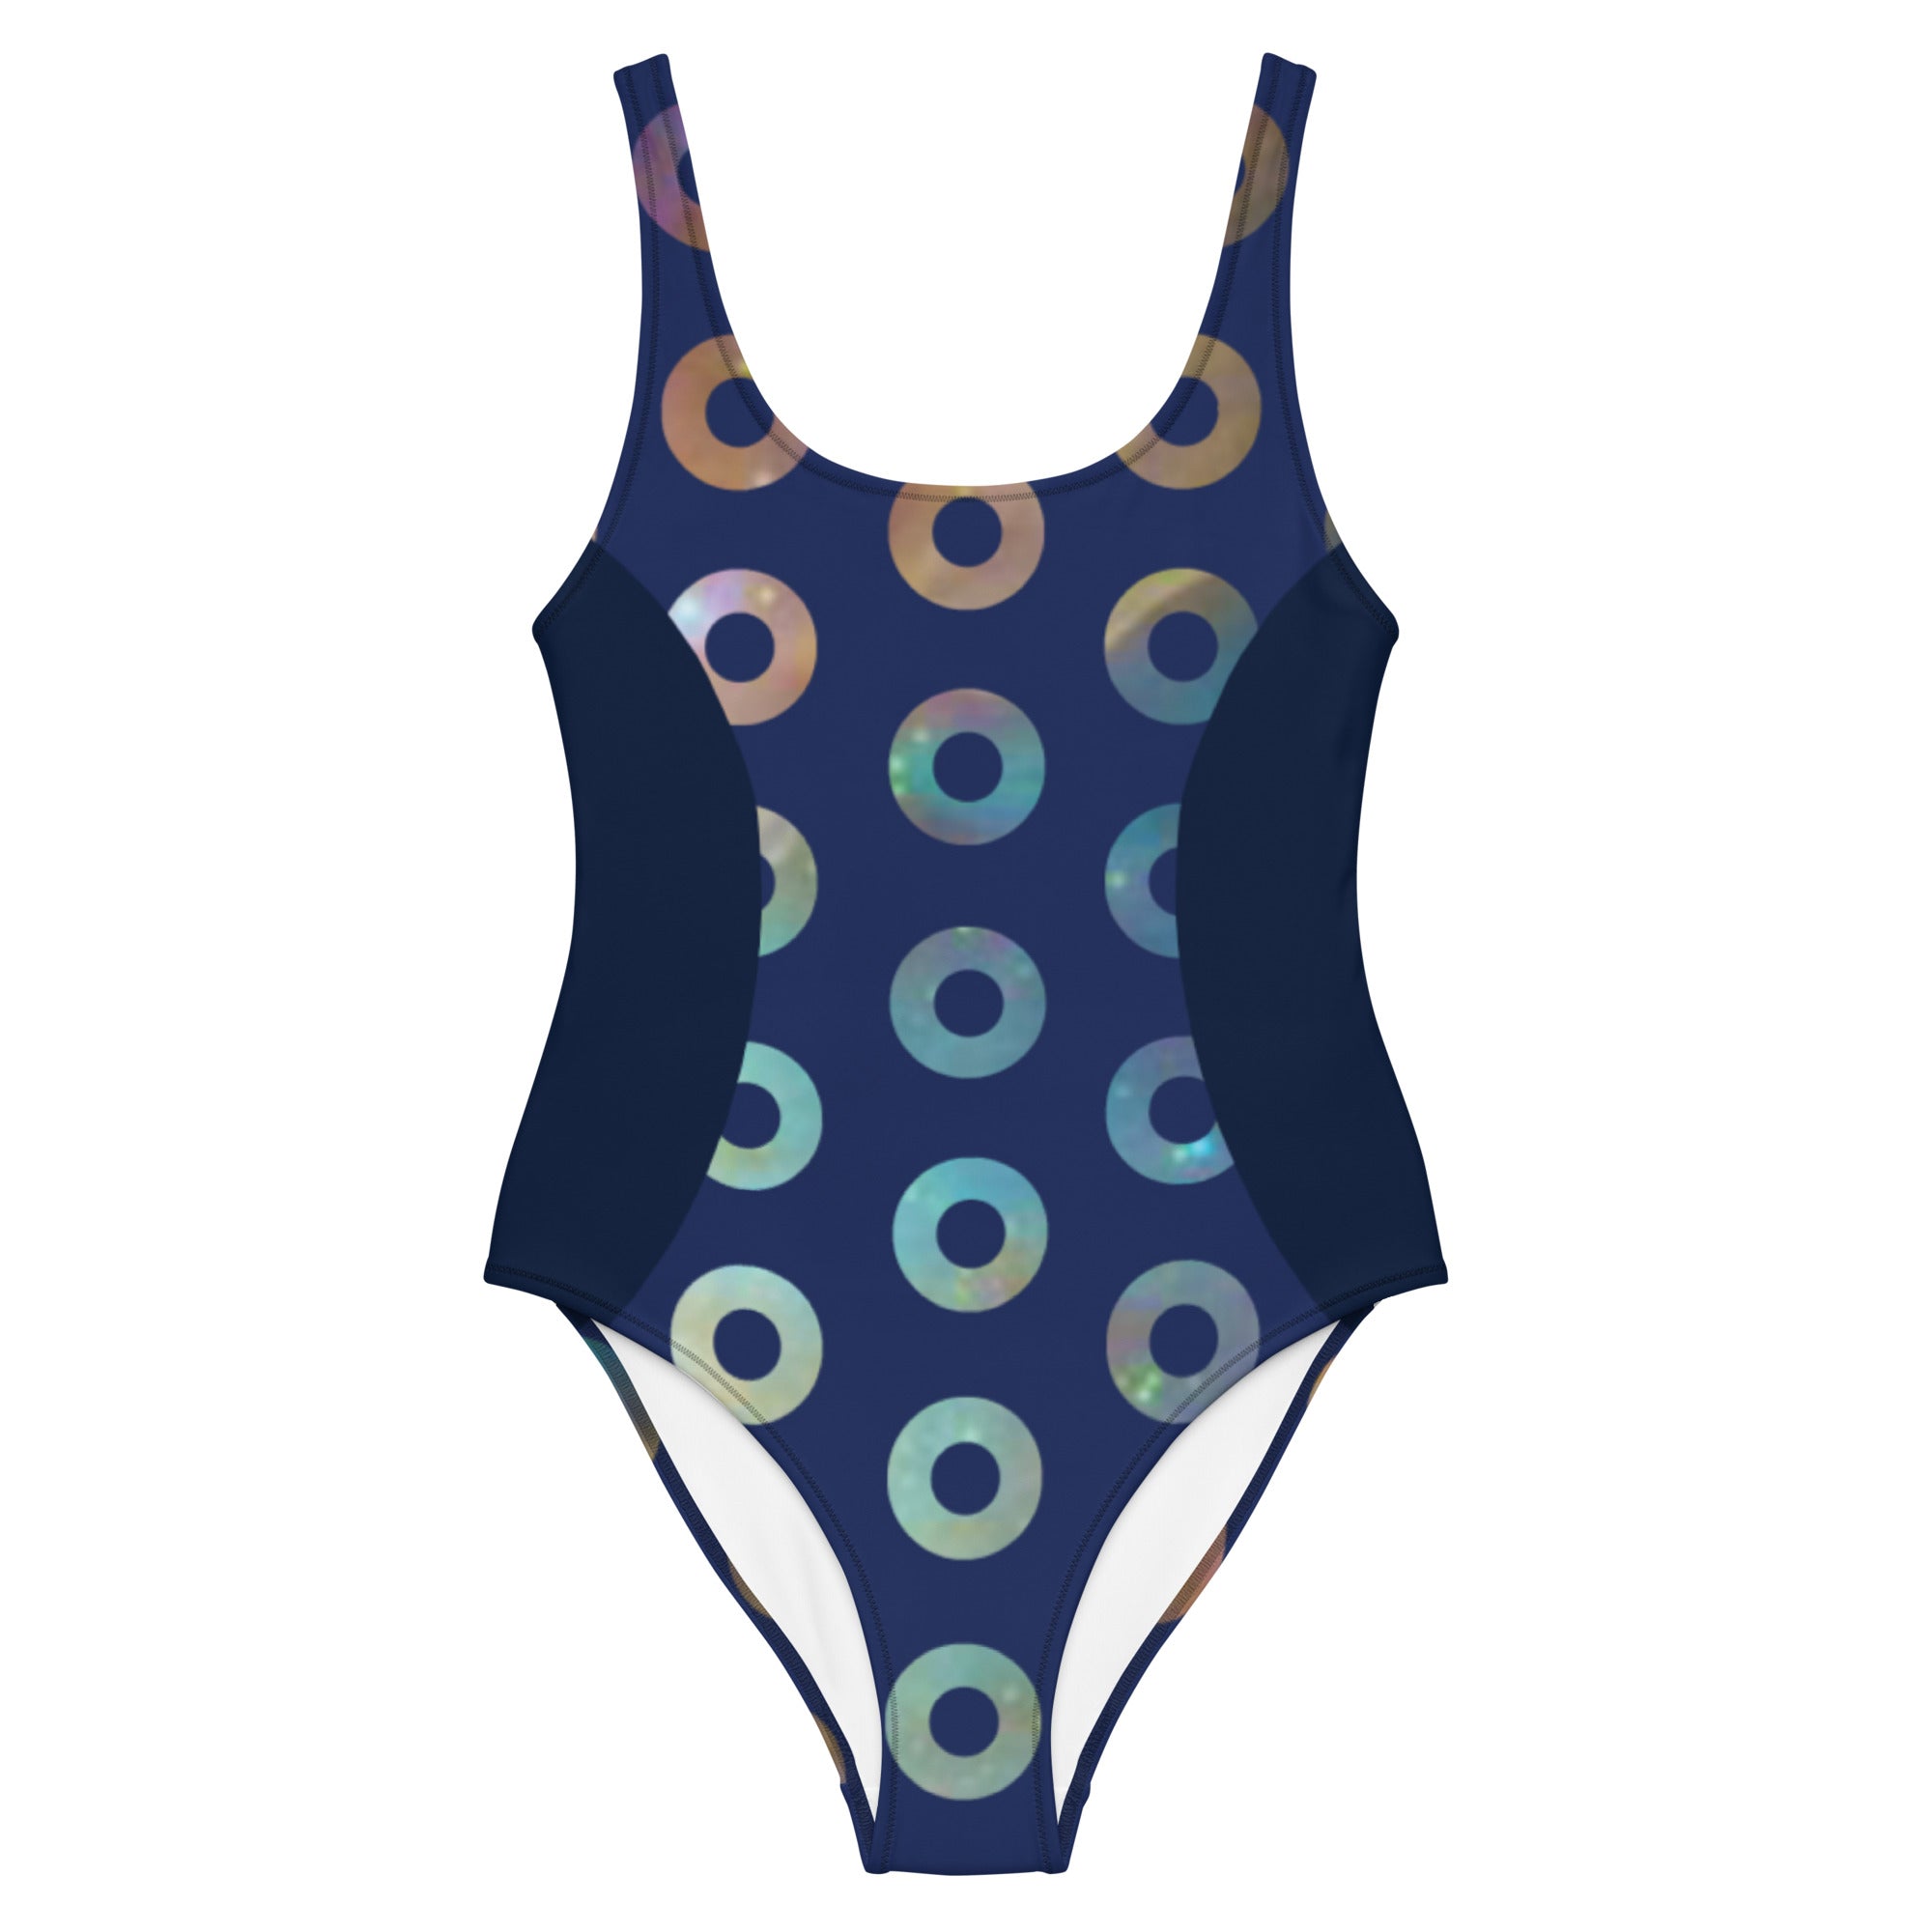 Fishman Blue Space Donuts One-Piece Phish Swimsuit